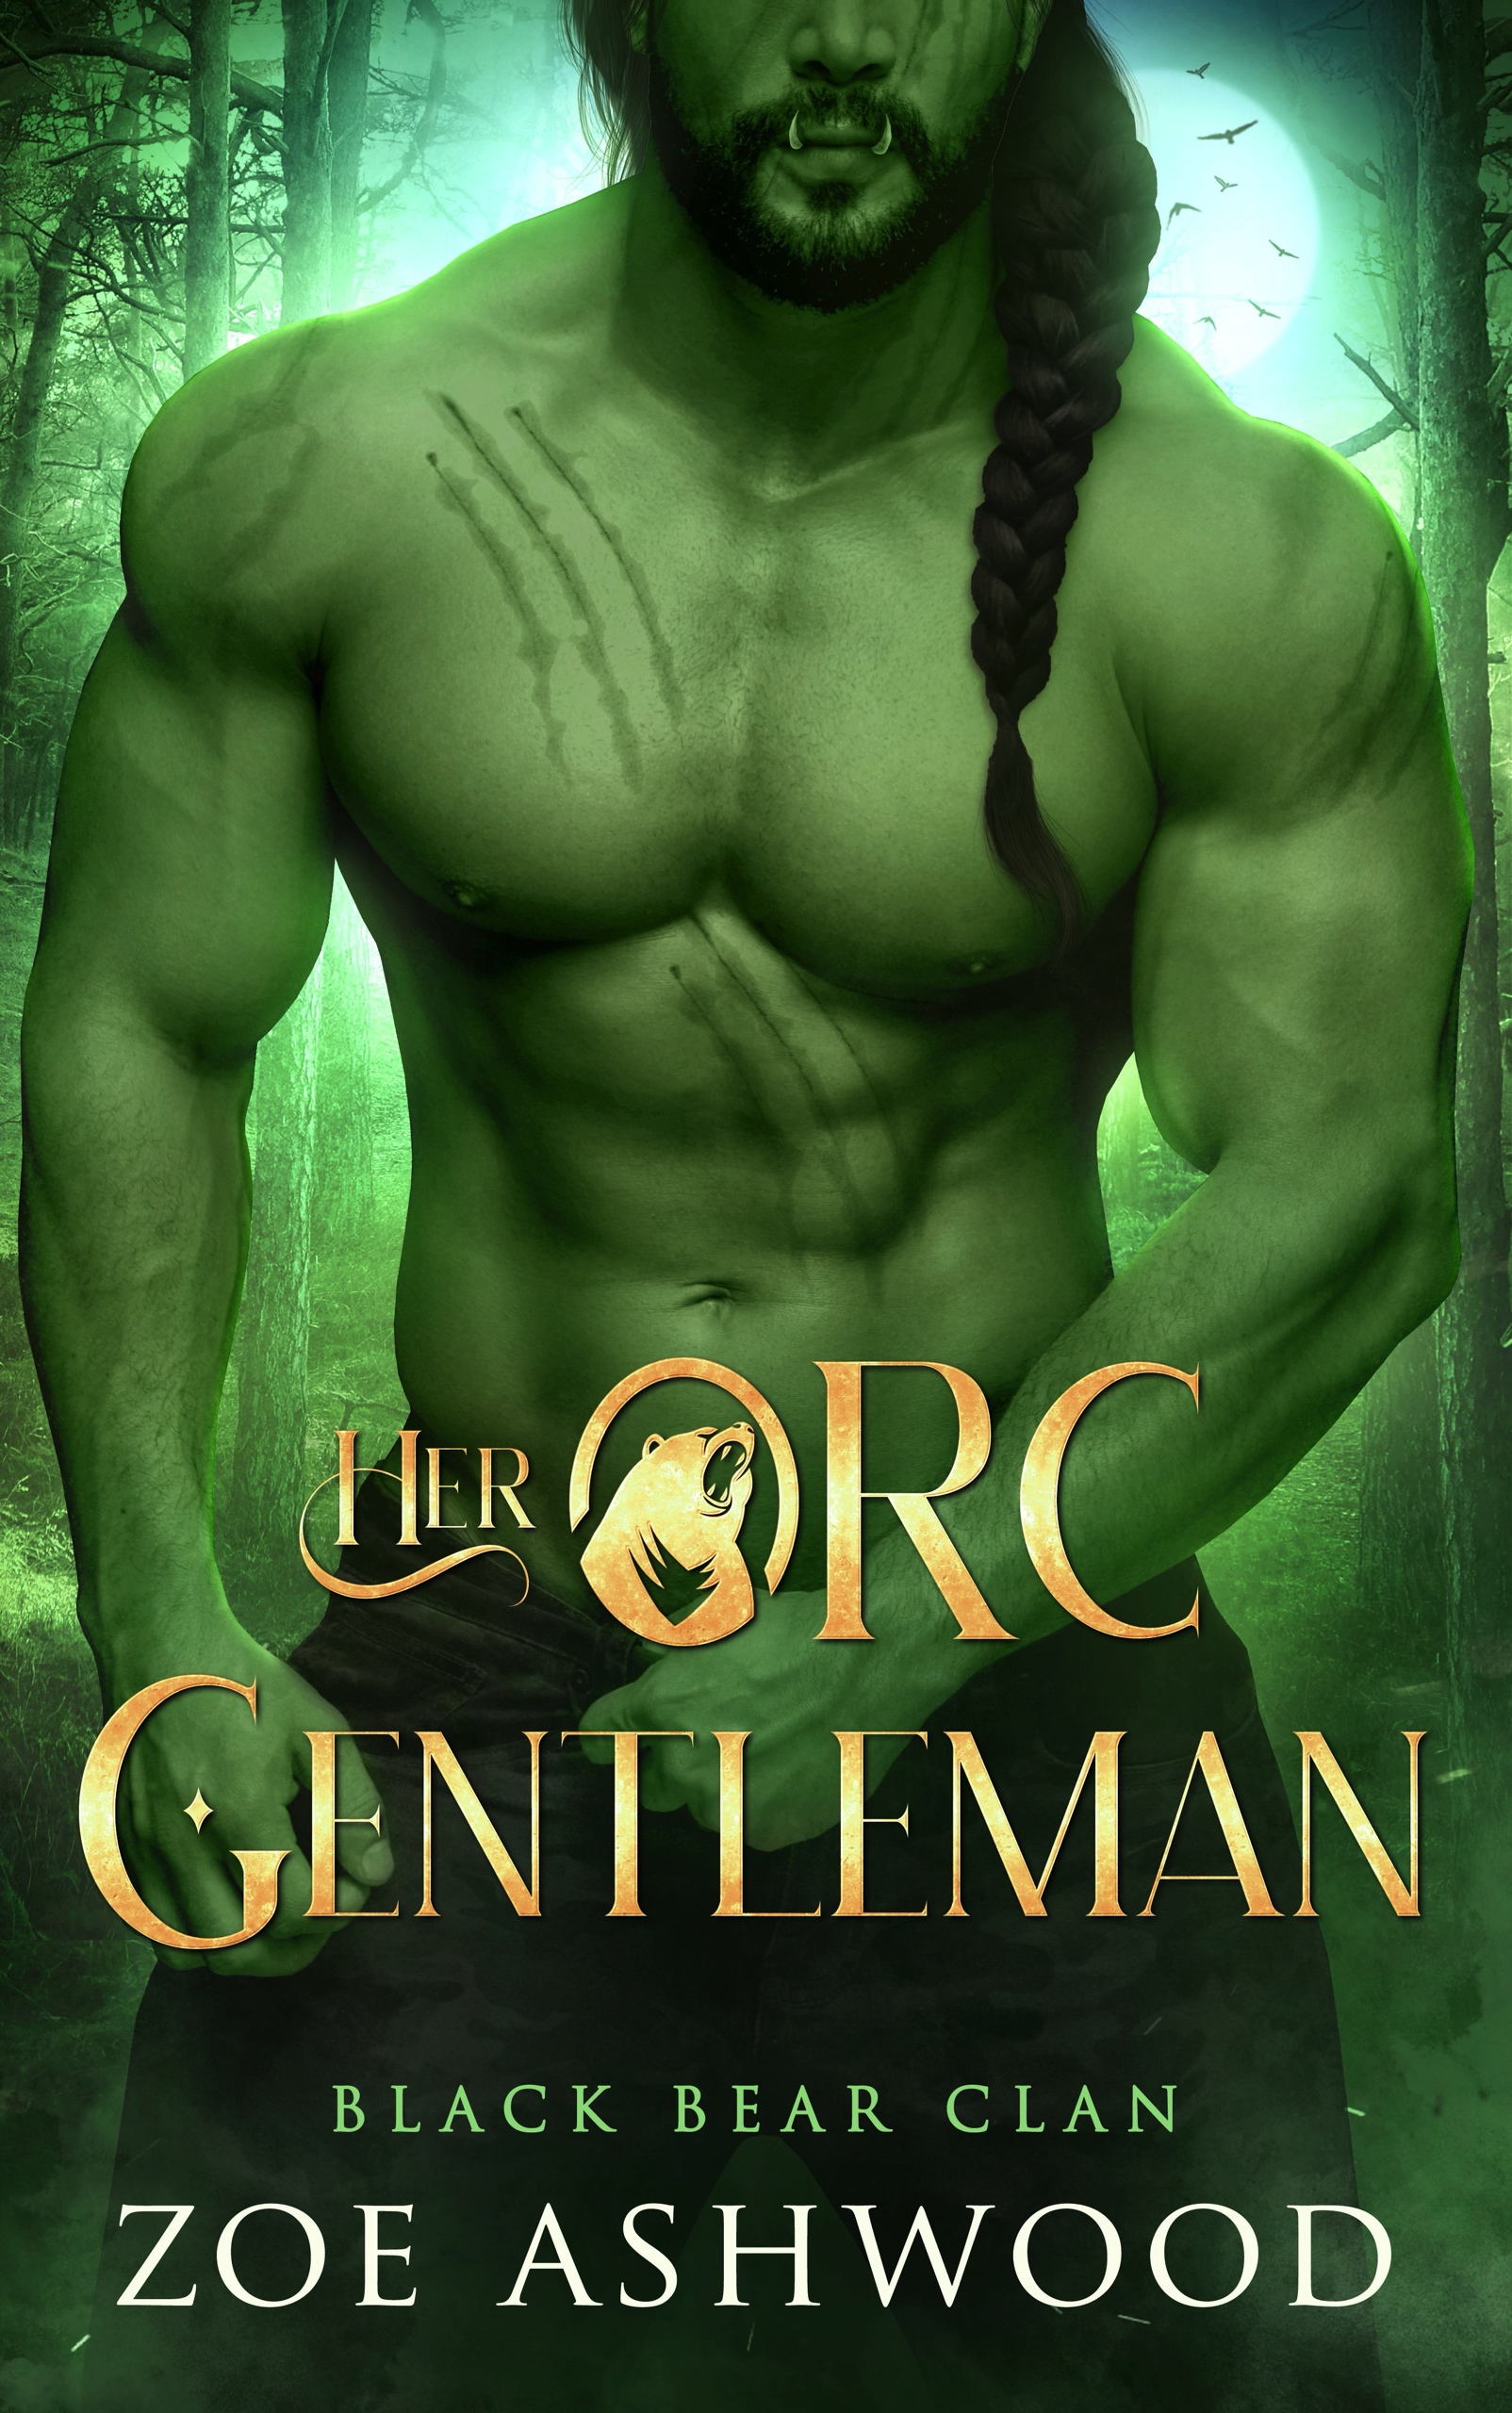 Her Orc Gentleman - an orc fantasy romance - by Zoe Ashwood